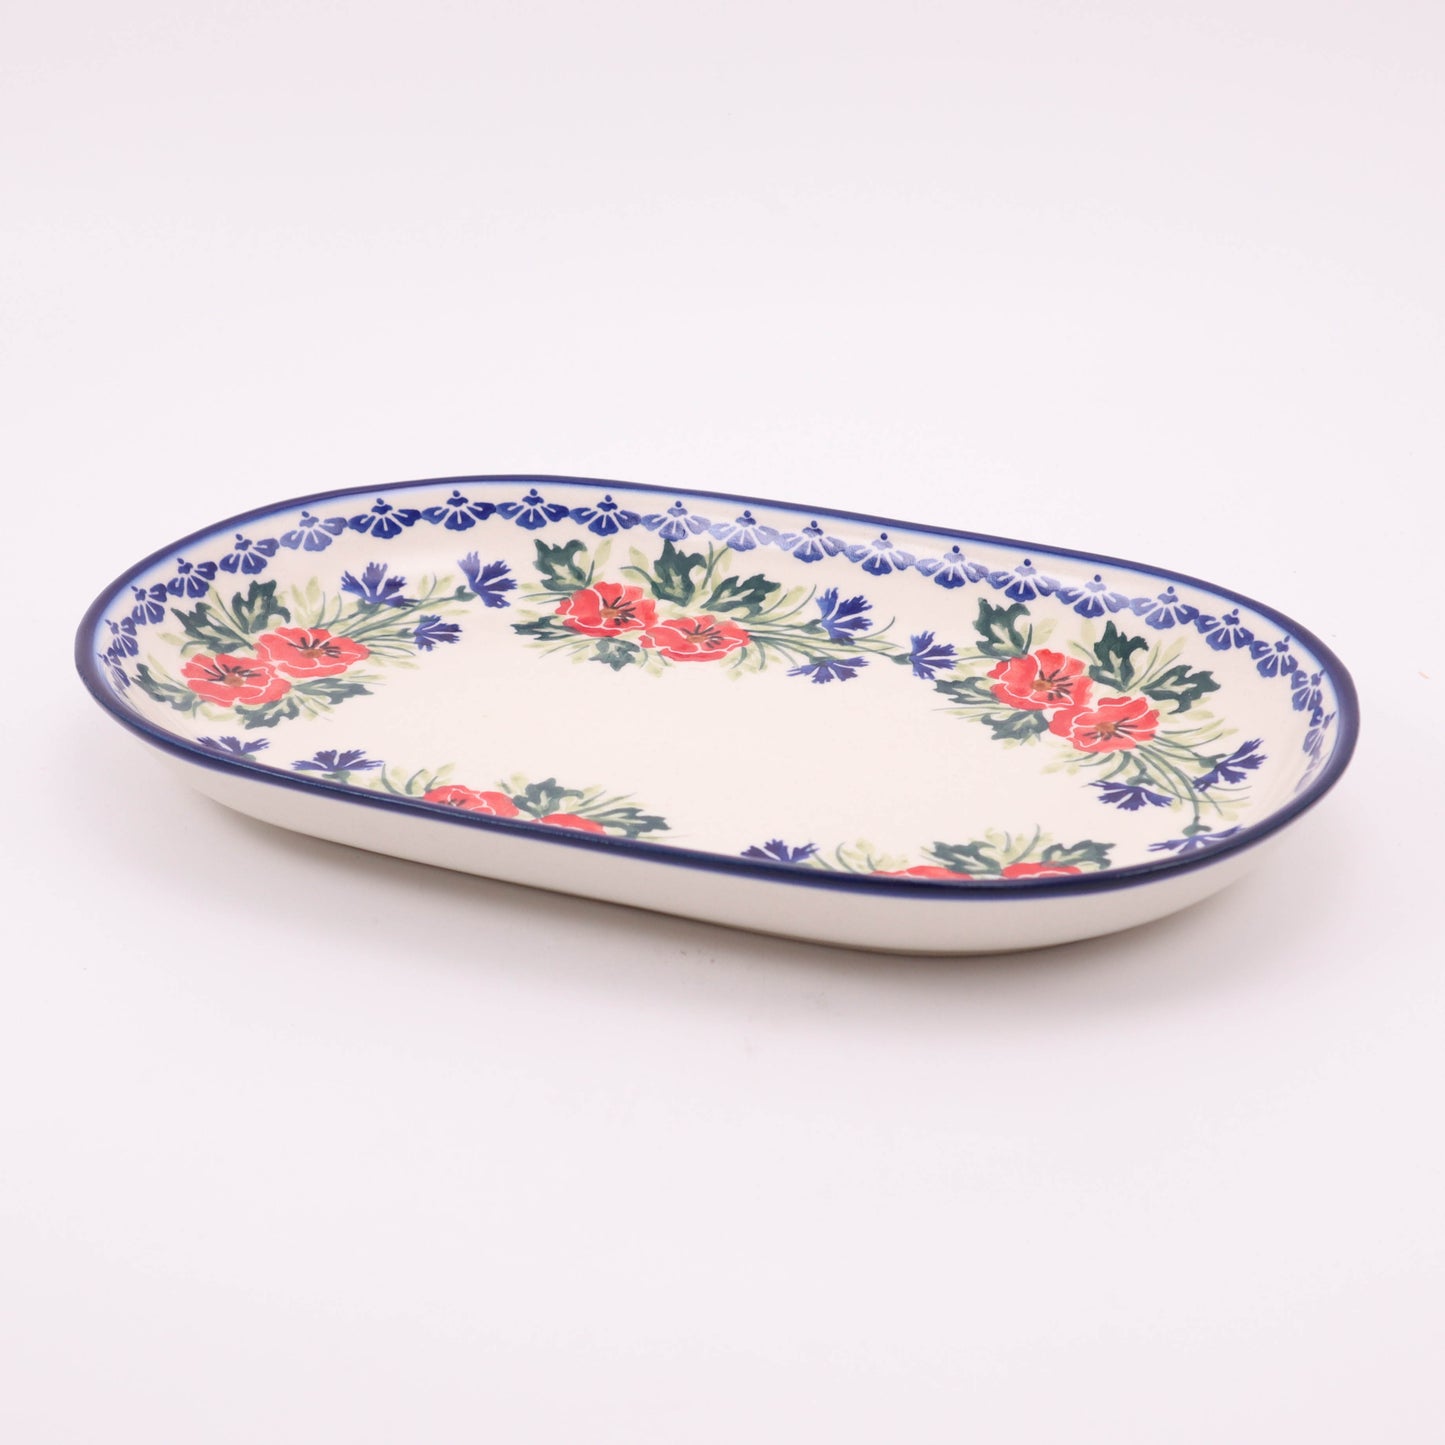 8.5"x13" Oval Serving Dish. Pattern: Charming Chicory